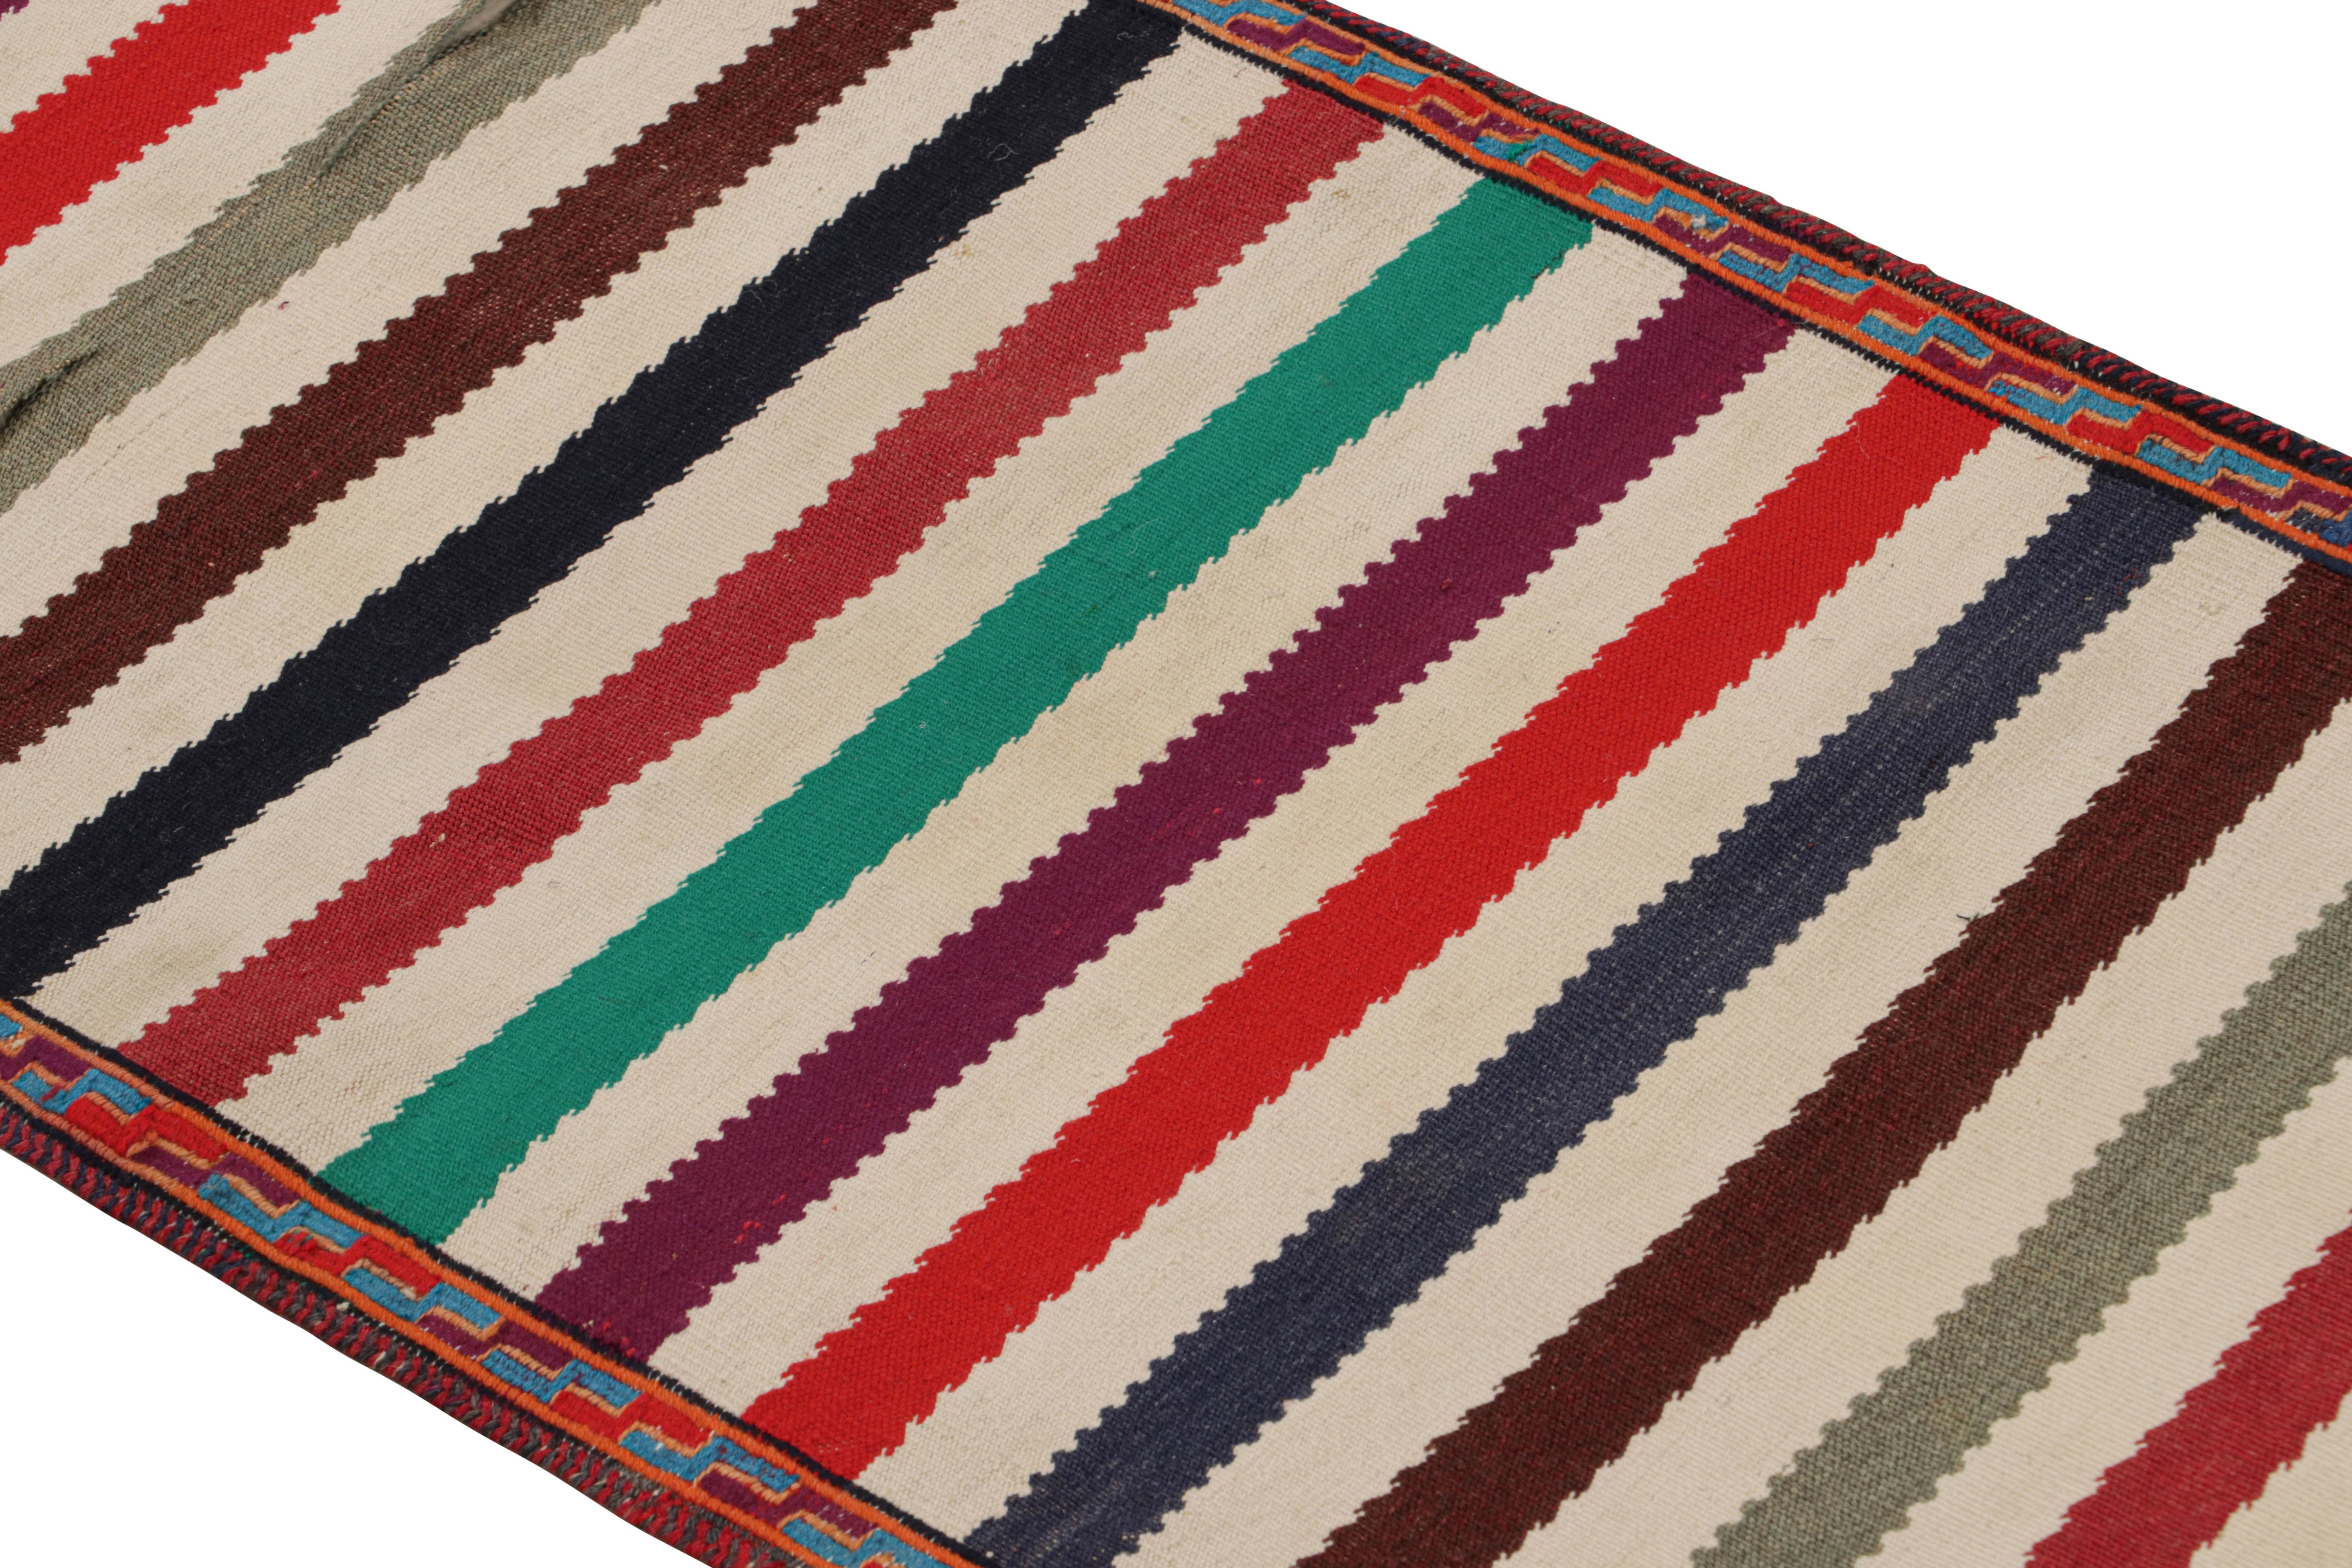 Hand-Knotted Vintage Afghan Kilim Runner Rug with Polychromatic Stripes, from Rug & Kilim